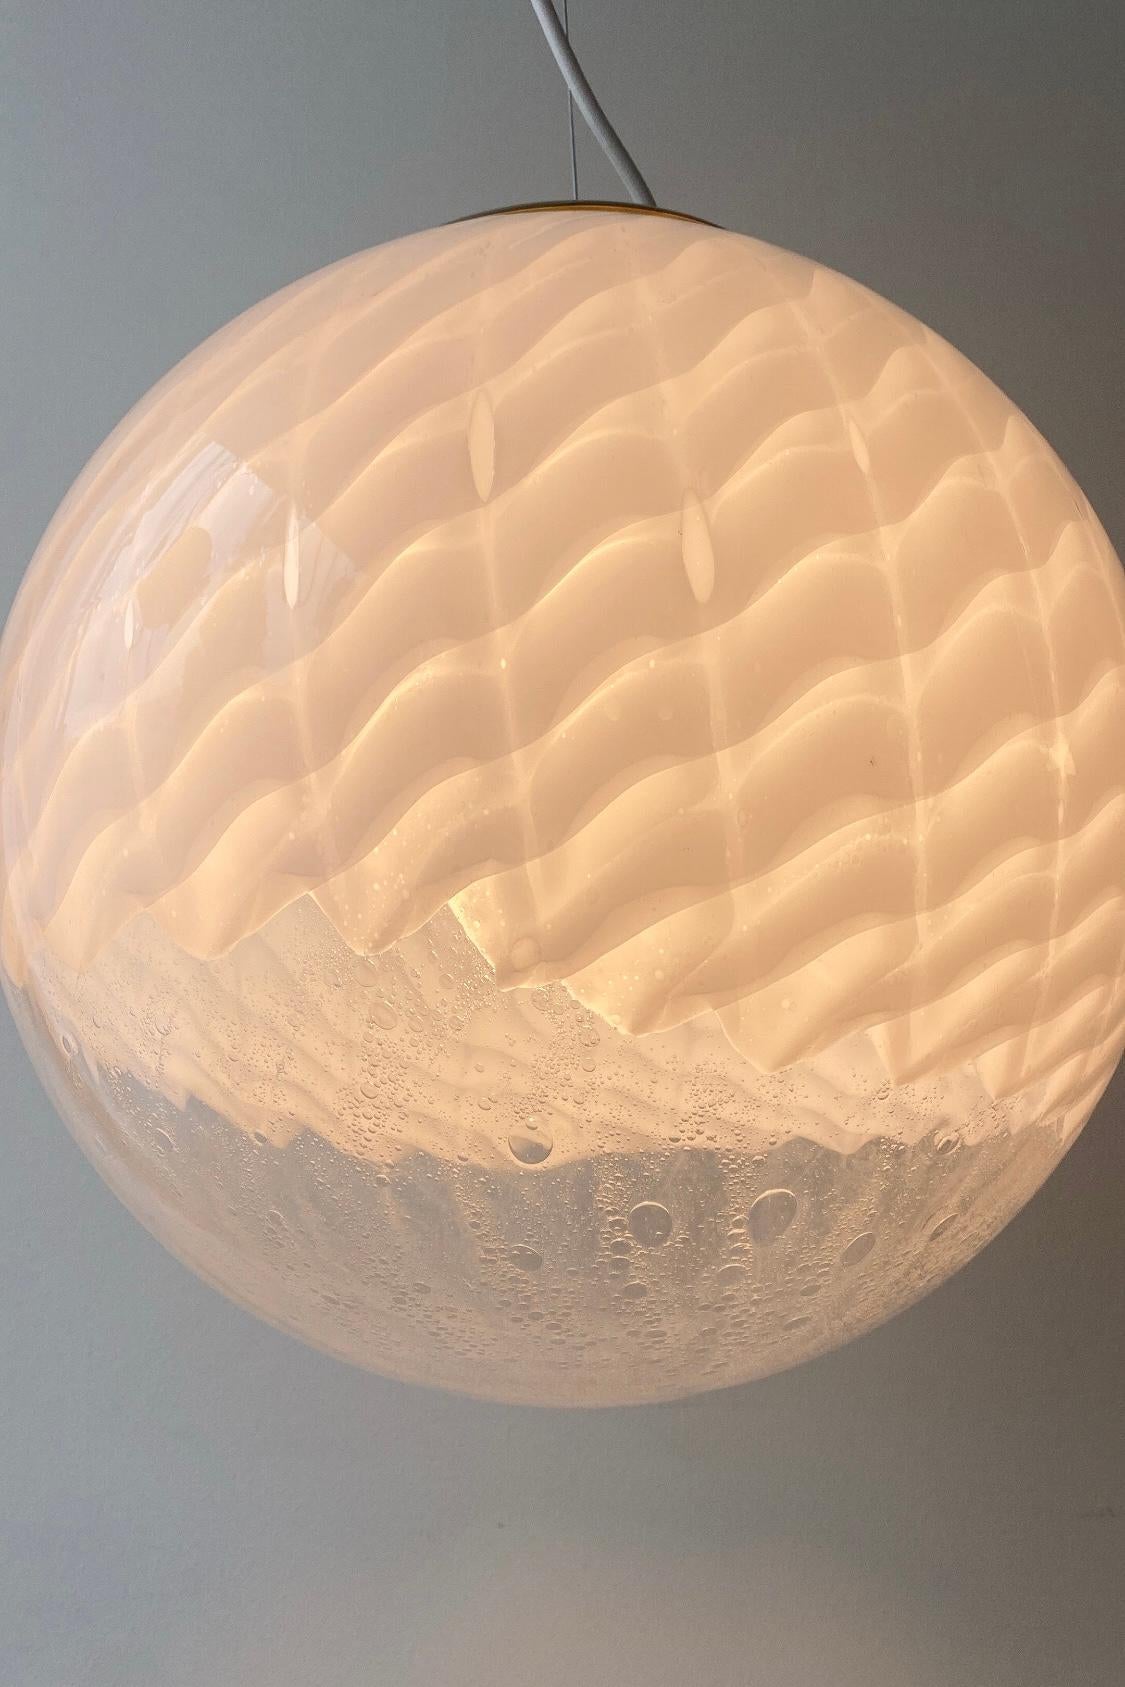 Fantastically beautiful Murano ceiling lamp in white and transparent mouth-blown glass with new hand molded brass suspension. The glass is mouth-blown in a round shape with fine bubbles and pattern. Handmade in Italy, 1970s. 
D: 40 cm.